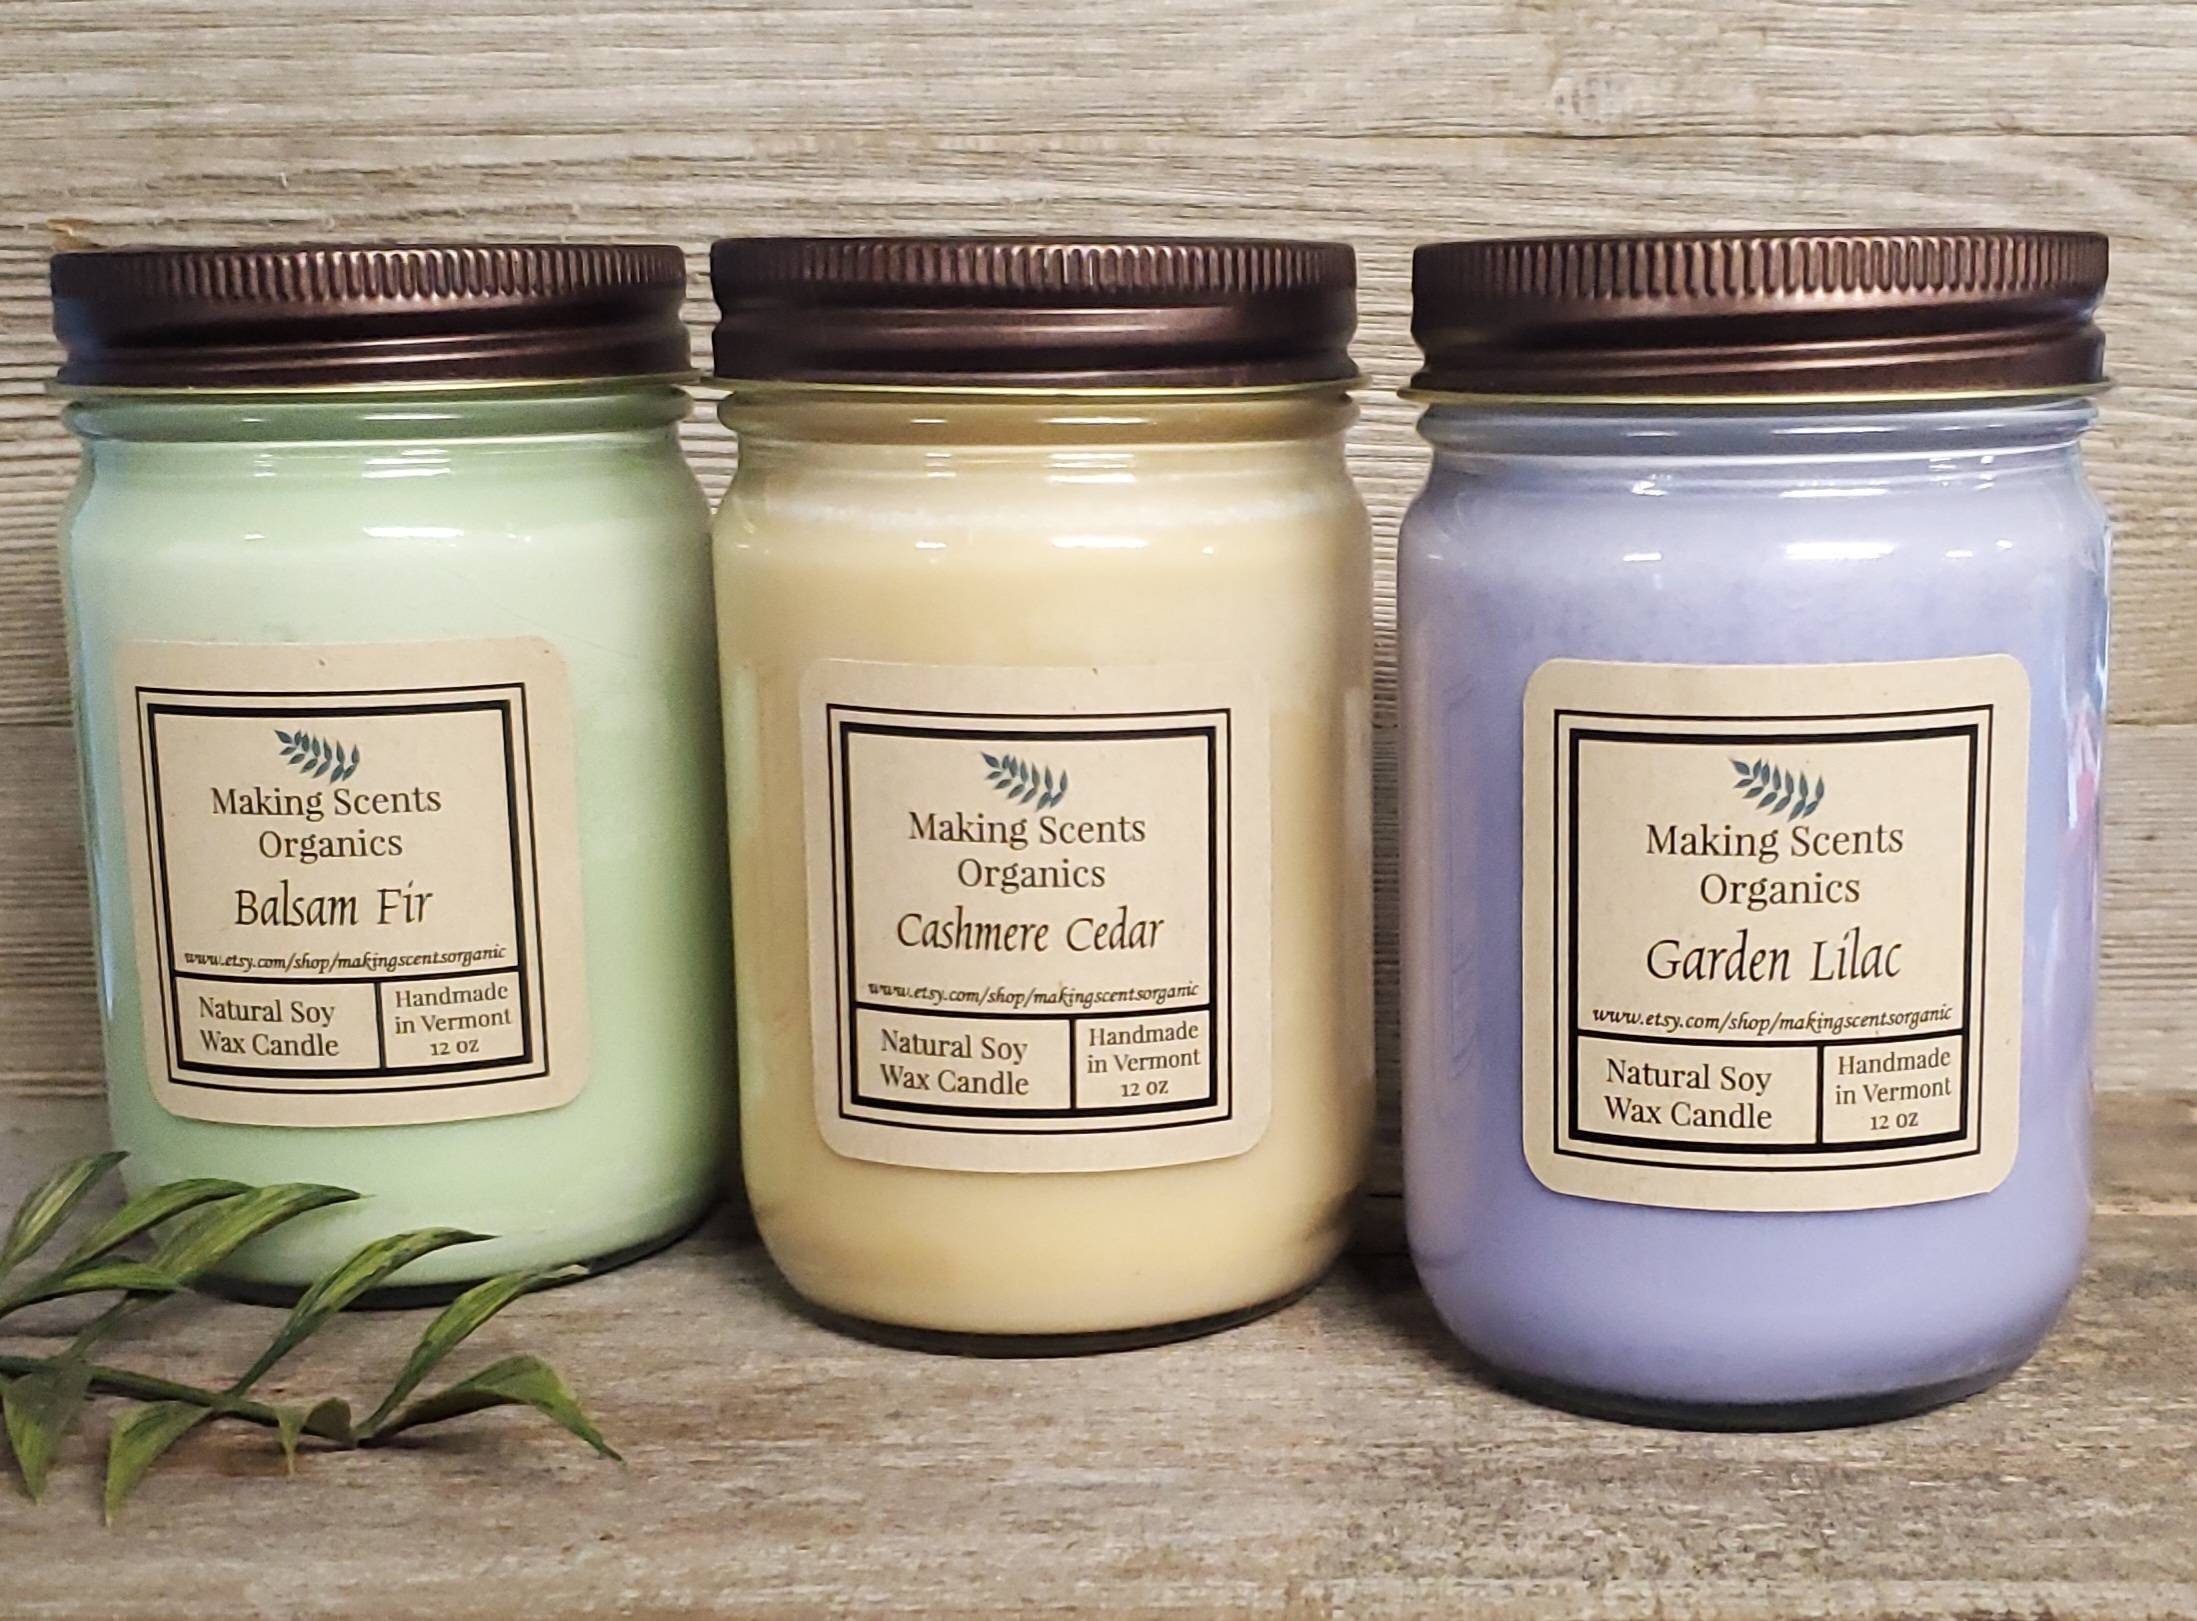 Pure Soy Wax Candles / Candles / Soy Candles / Balsam Fir & 60+ Scents / 12  oz Mason Jar Candle / Made in VT / Making Scents Organics